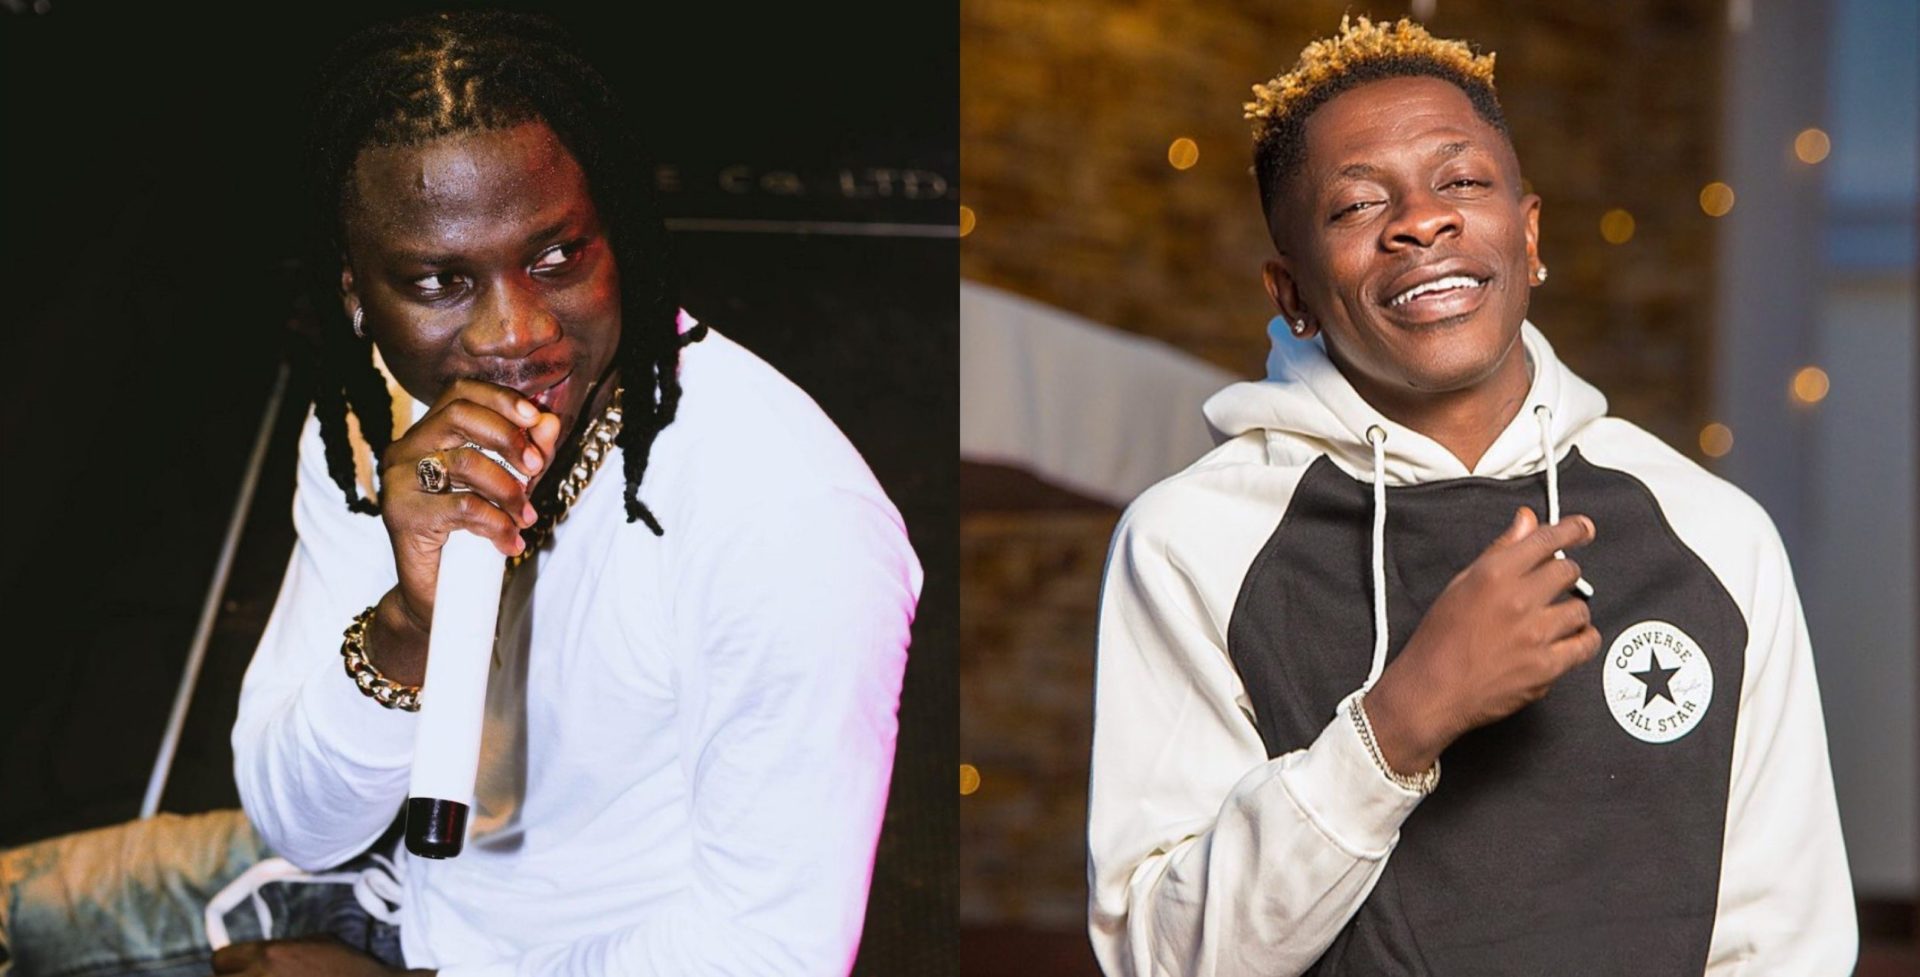 Shatta Wale’s Approach In The Fight Against The Nigerian Music Industry Wrong – Stonebwoy Says And Throws His Support Behind Him